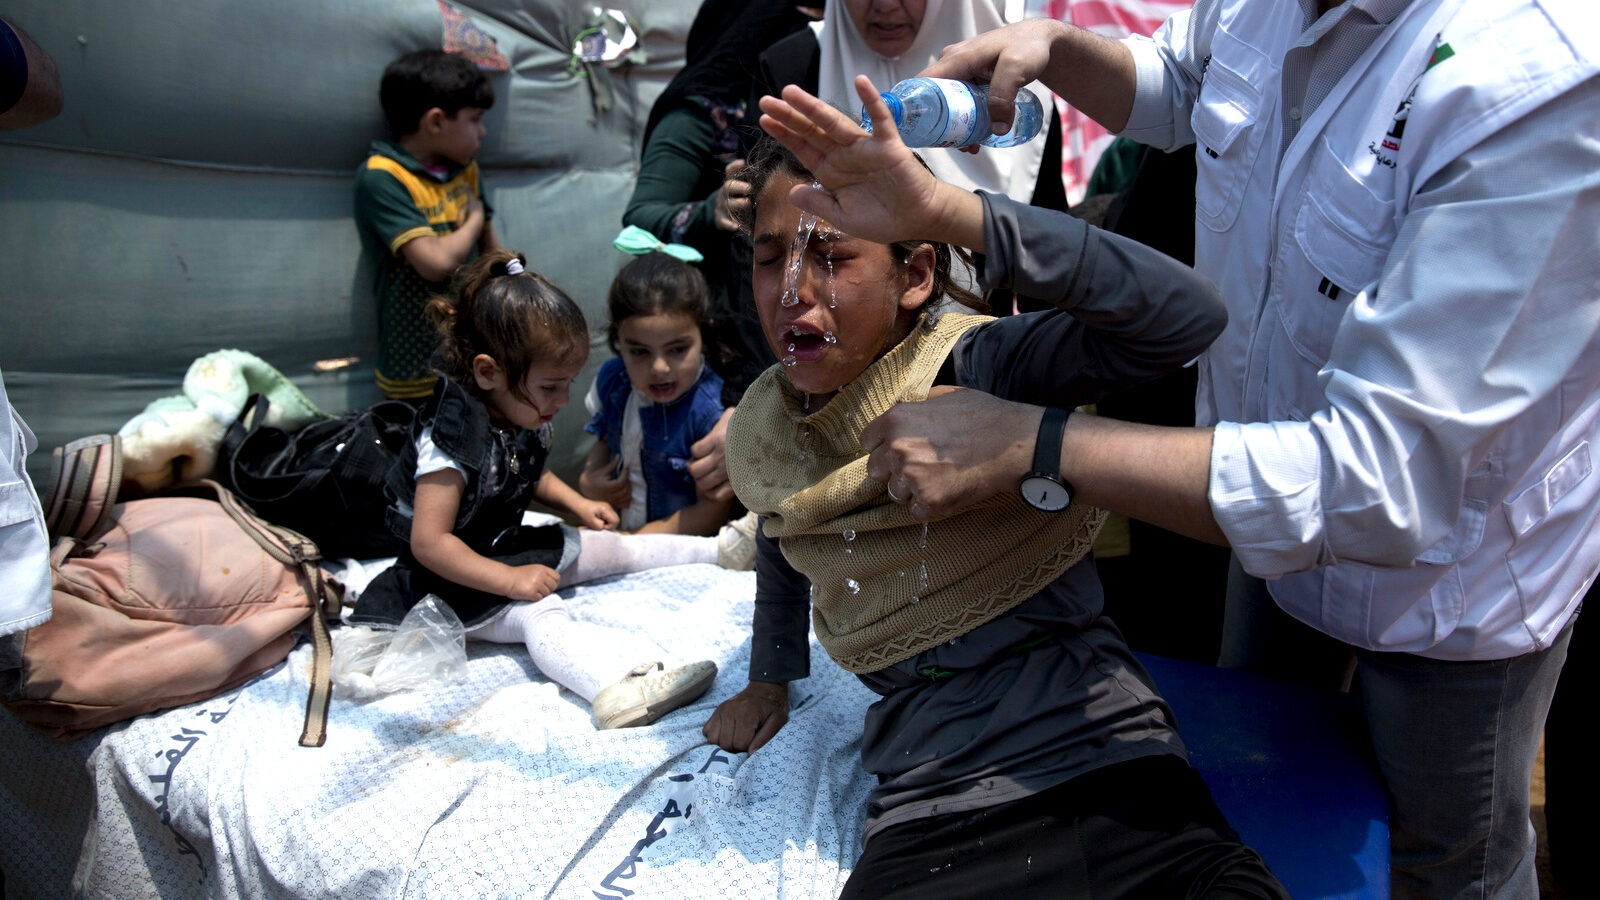 Medics treat Palestinian children suffering from teargas inhalation during a protest near Beit Lahiya, Gaza Strip, May 14, 2018. Israeli soldiers shot and killed dozens of Palestinians during mass protests along the Gaza border on Monday. It was the deadliest day there since a devastating 2014 cross-border war and cast a pall over Israel's festive inauguration of the new U.S. Embassy in contested Jerusalem. (AP/Dusan Vranic)